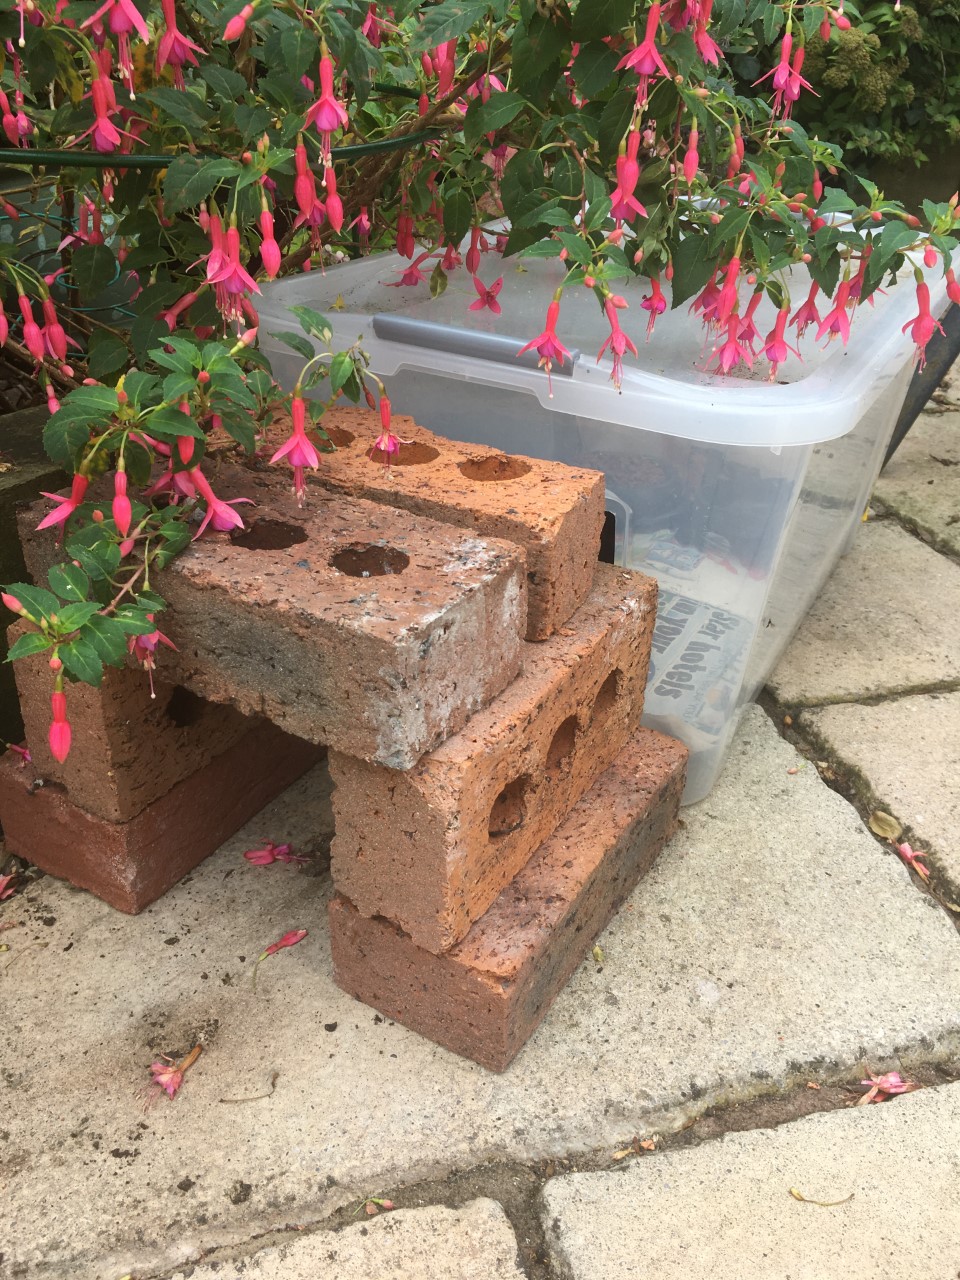 The outside of the feeding station, with a 15cm square brick tunnel to help deter cats